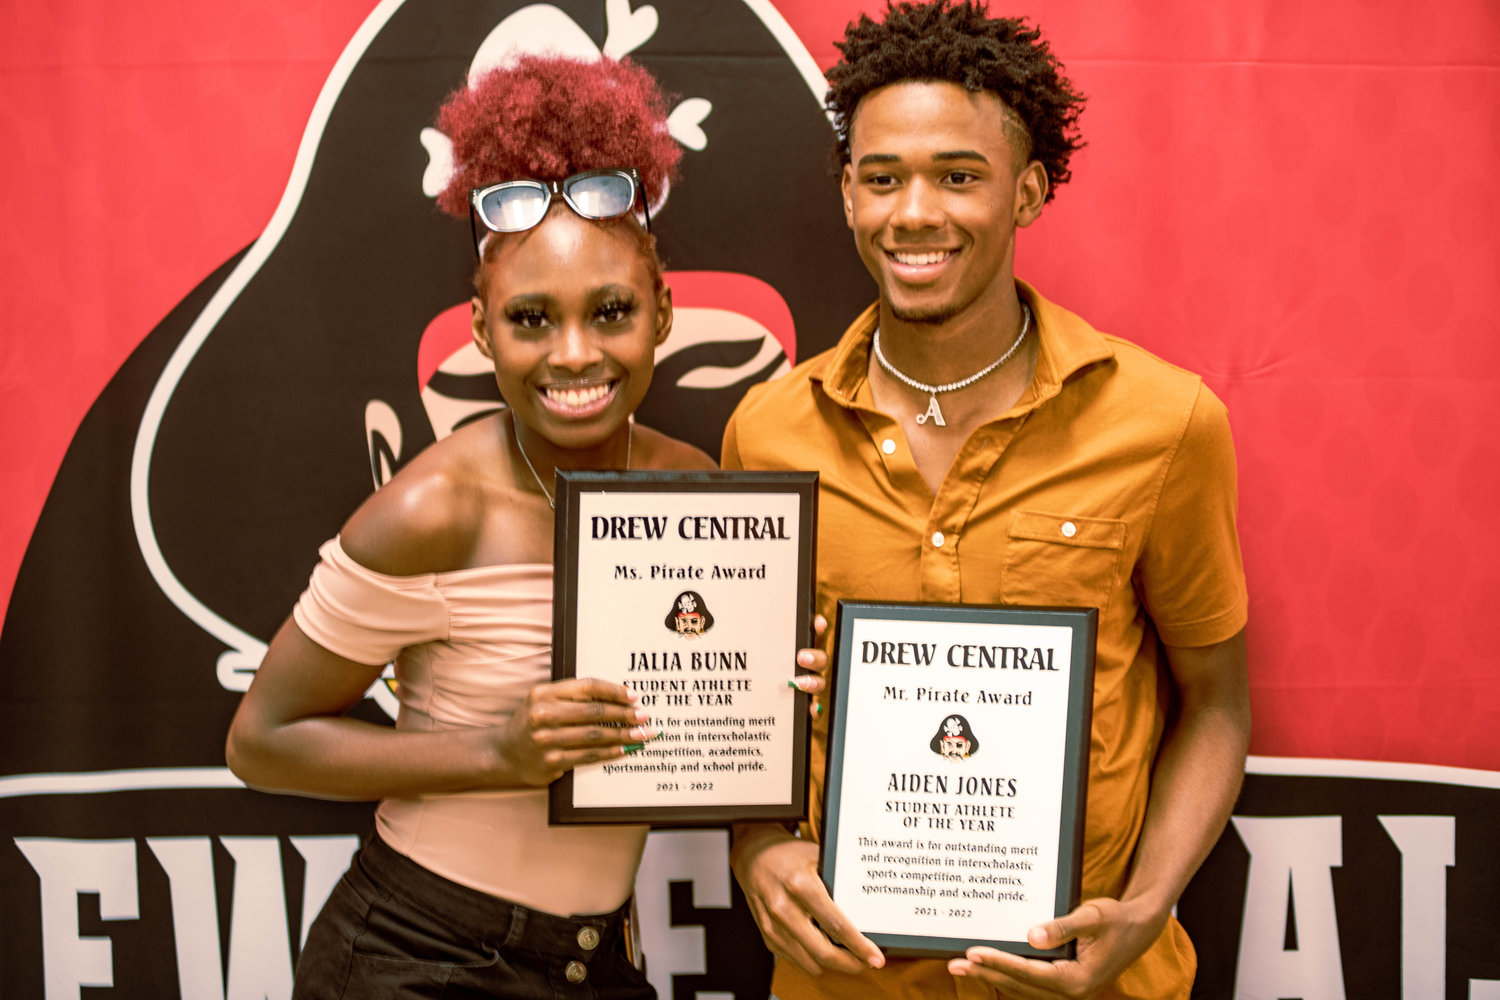 JAILA BUNN and AIDEN JONES have been selected for the Ms. Pirate and Mr. Pirate Award. The award was given to the student athlete that not only excelled in sports during the school season but also excelled in the classroom and in behavior. Each award is based on a point system with the highest point totals being named the honorary award winners. Bunn and Jones will also be the featured Pirate and Lady Pirate pictured on Drew Central’s website, www.dcpiratenation.com, for the 2022-23 school year.